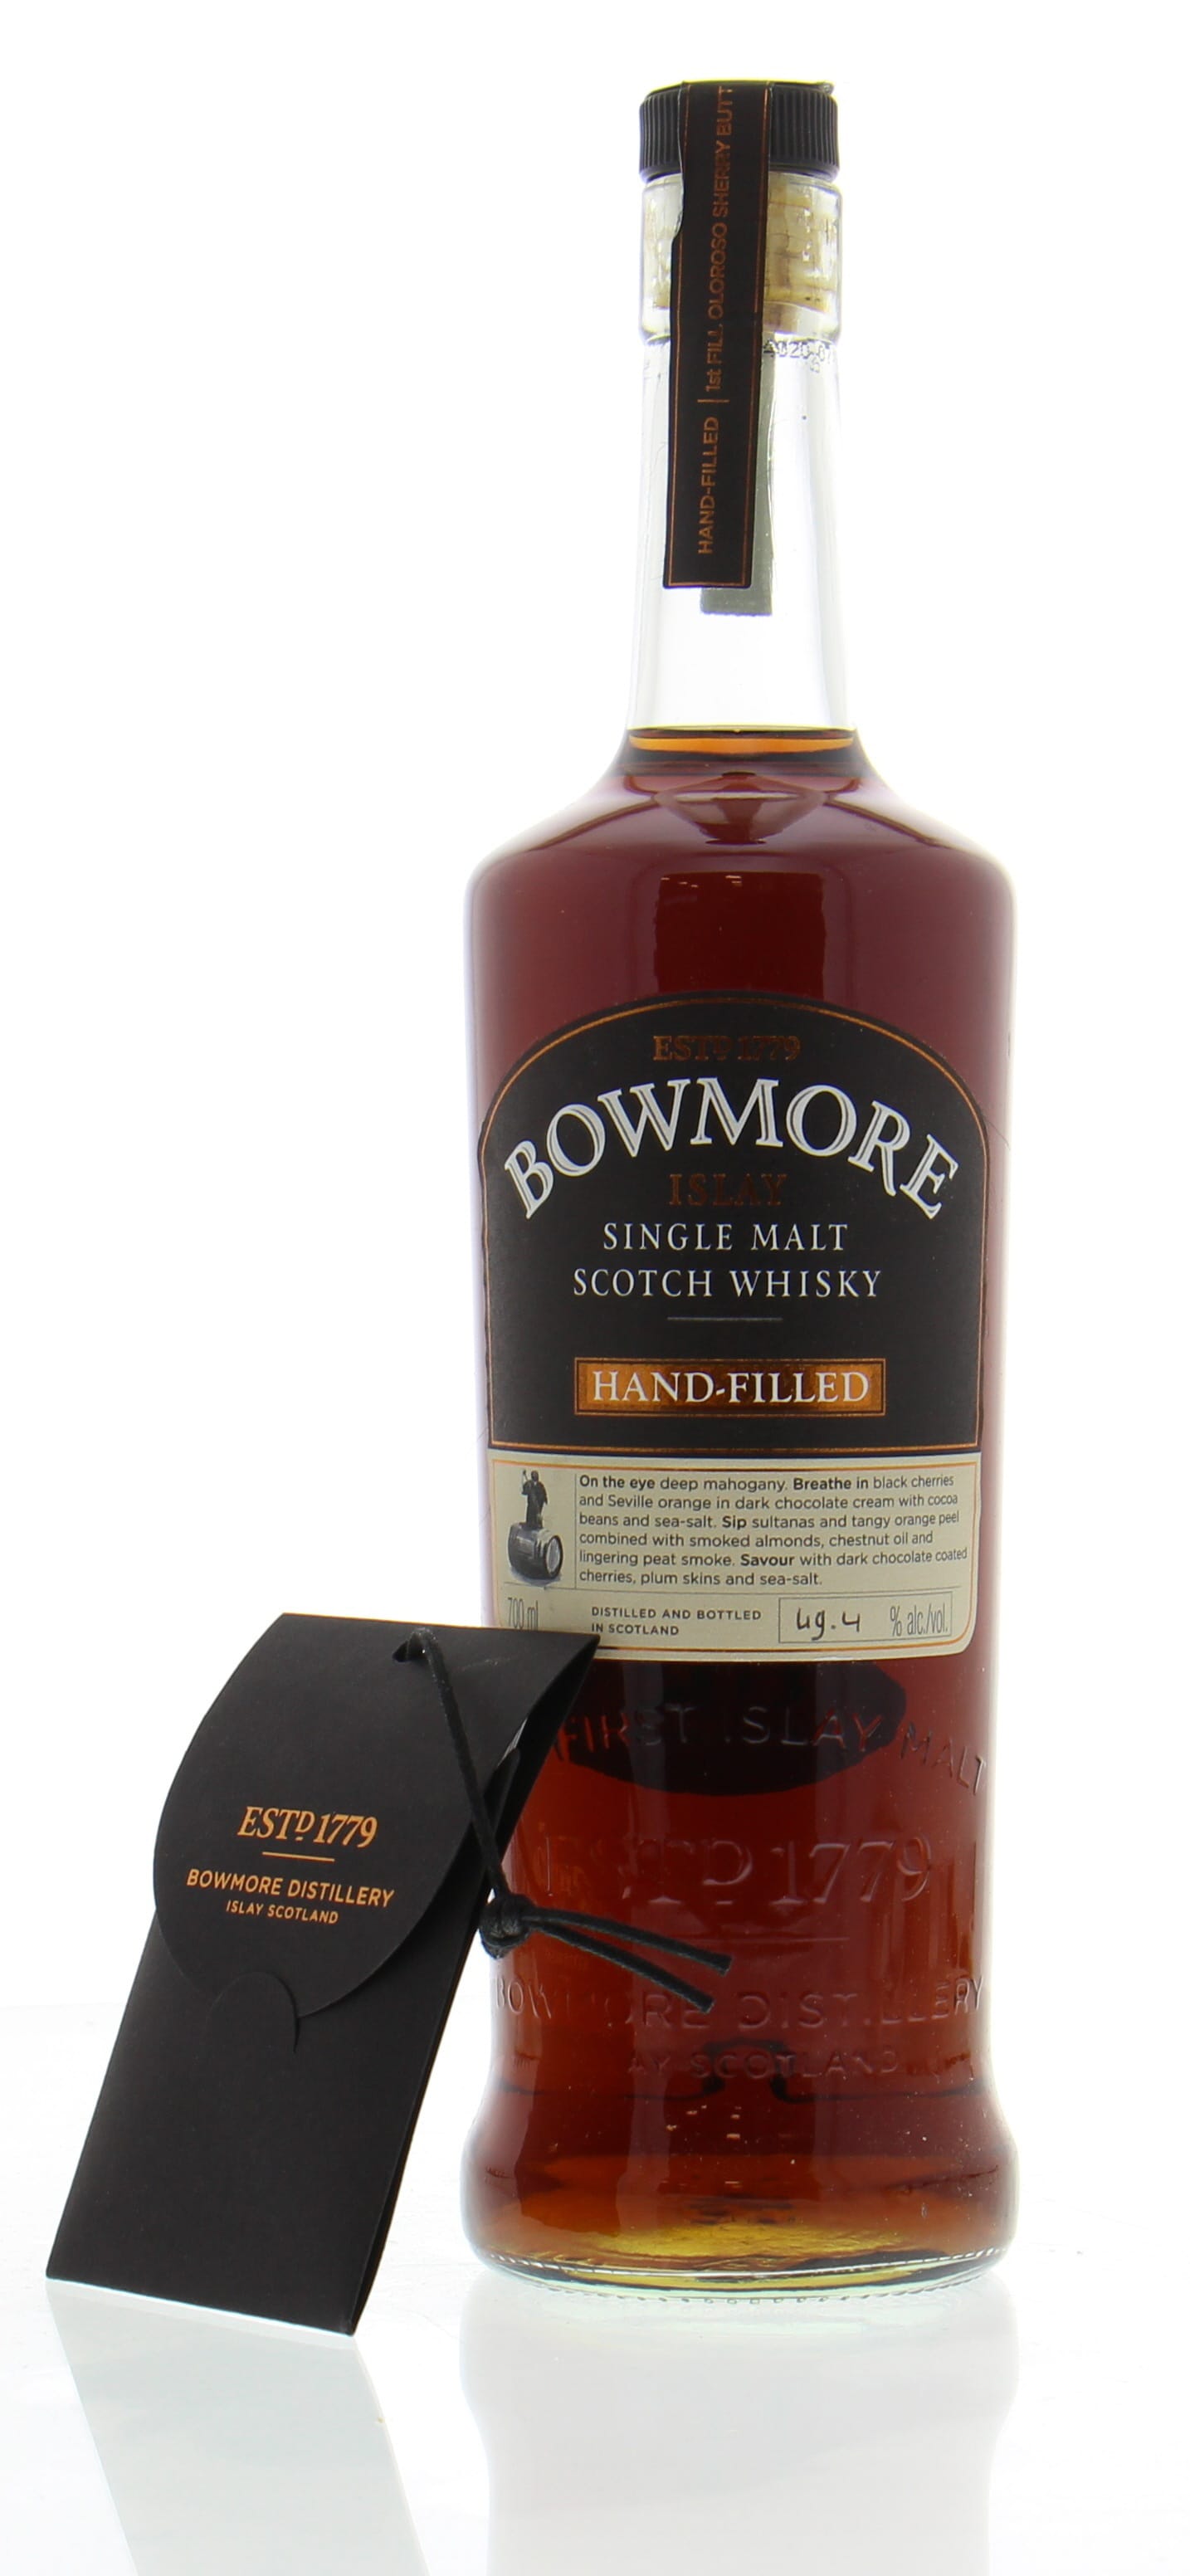 Bowmore - 18 Years Old Hand-filled at the distillery Cask:1572 49.4% 1995